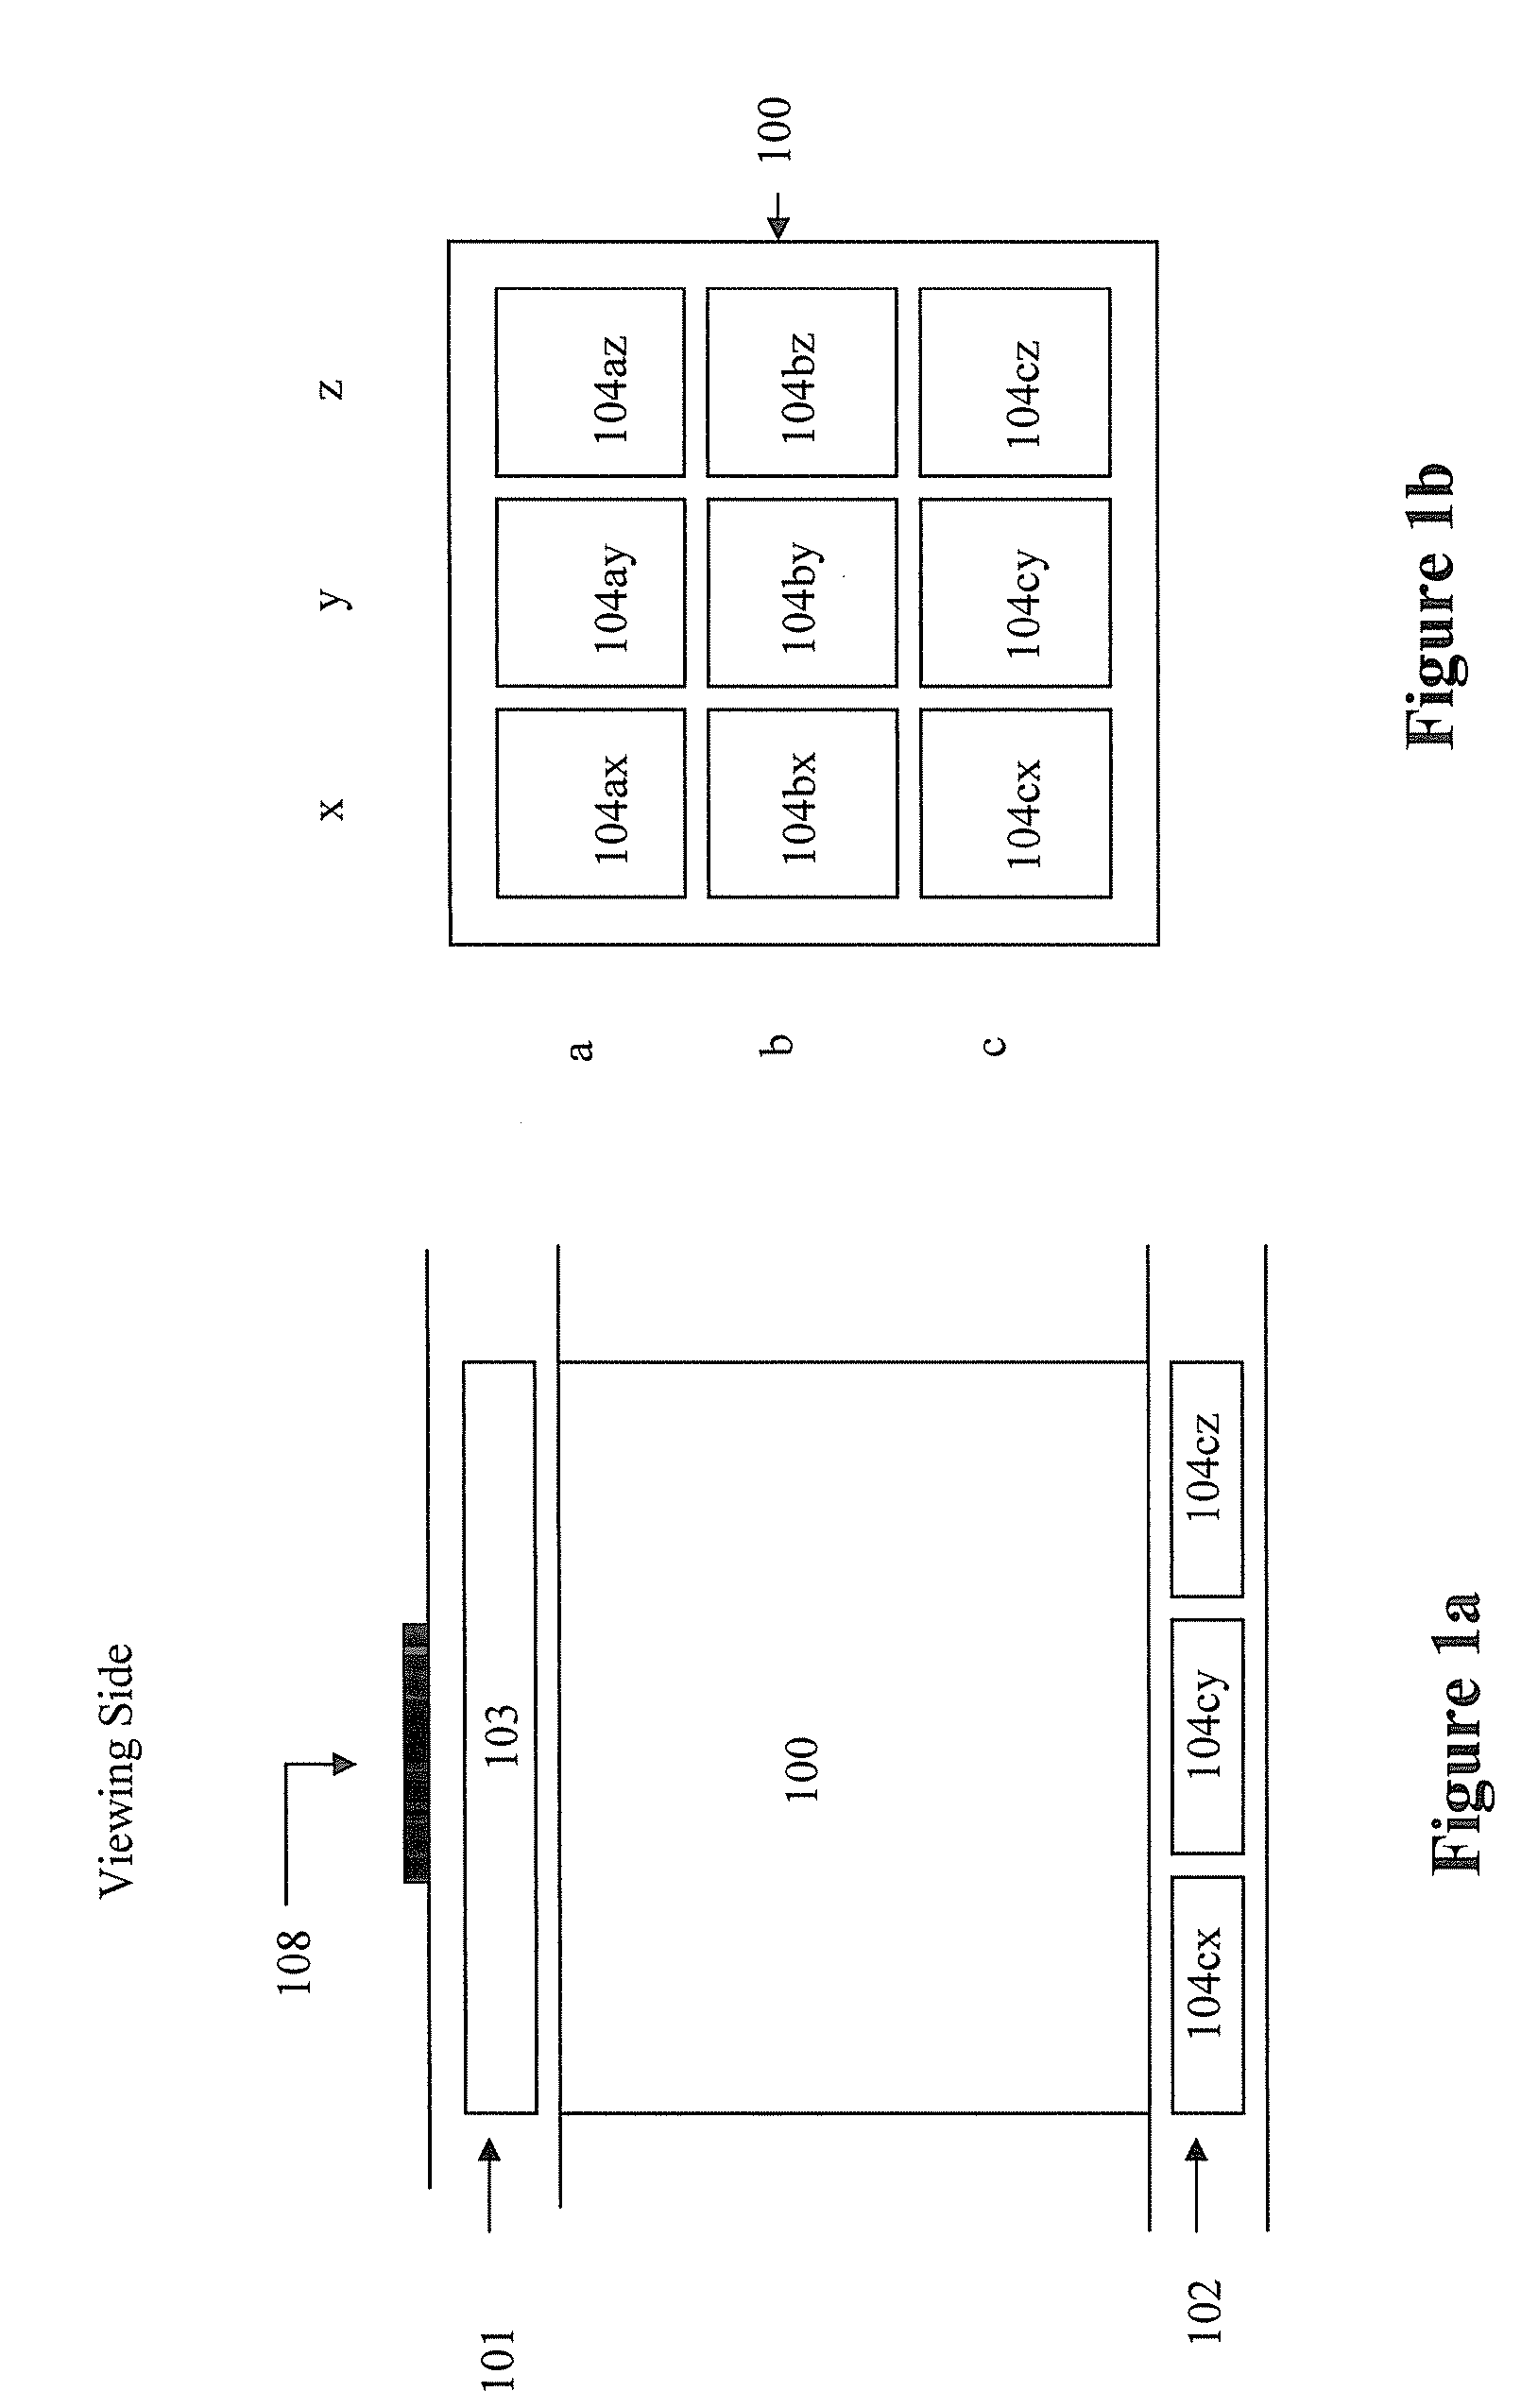 Color display devices